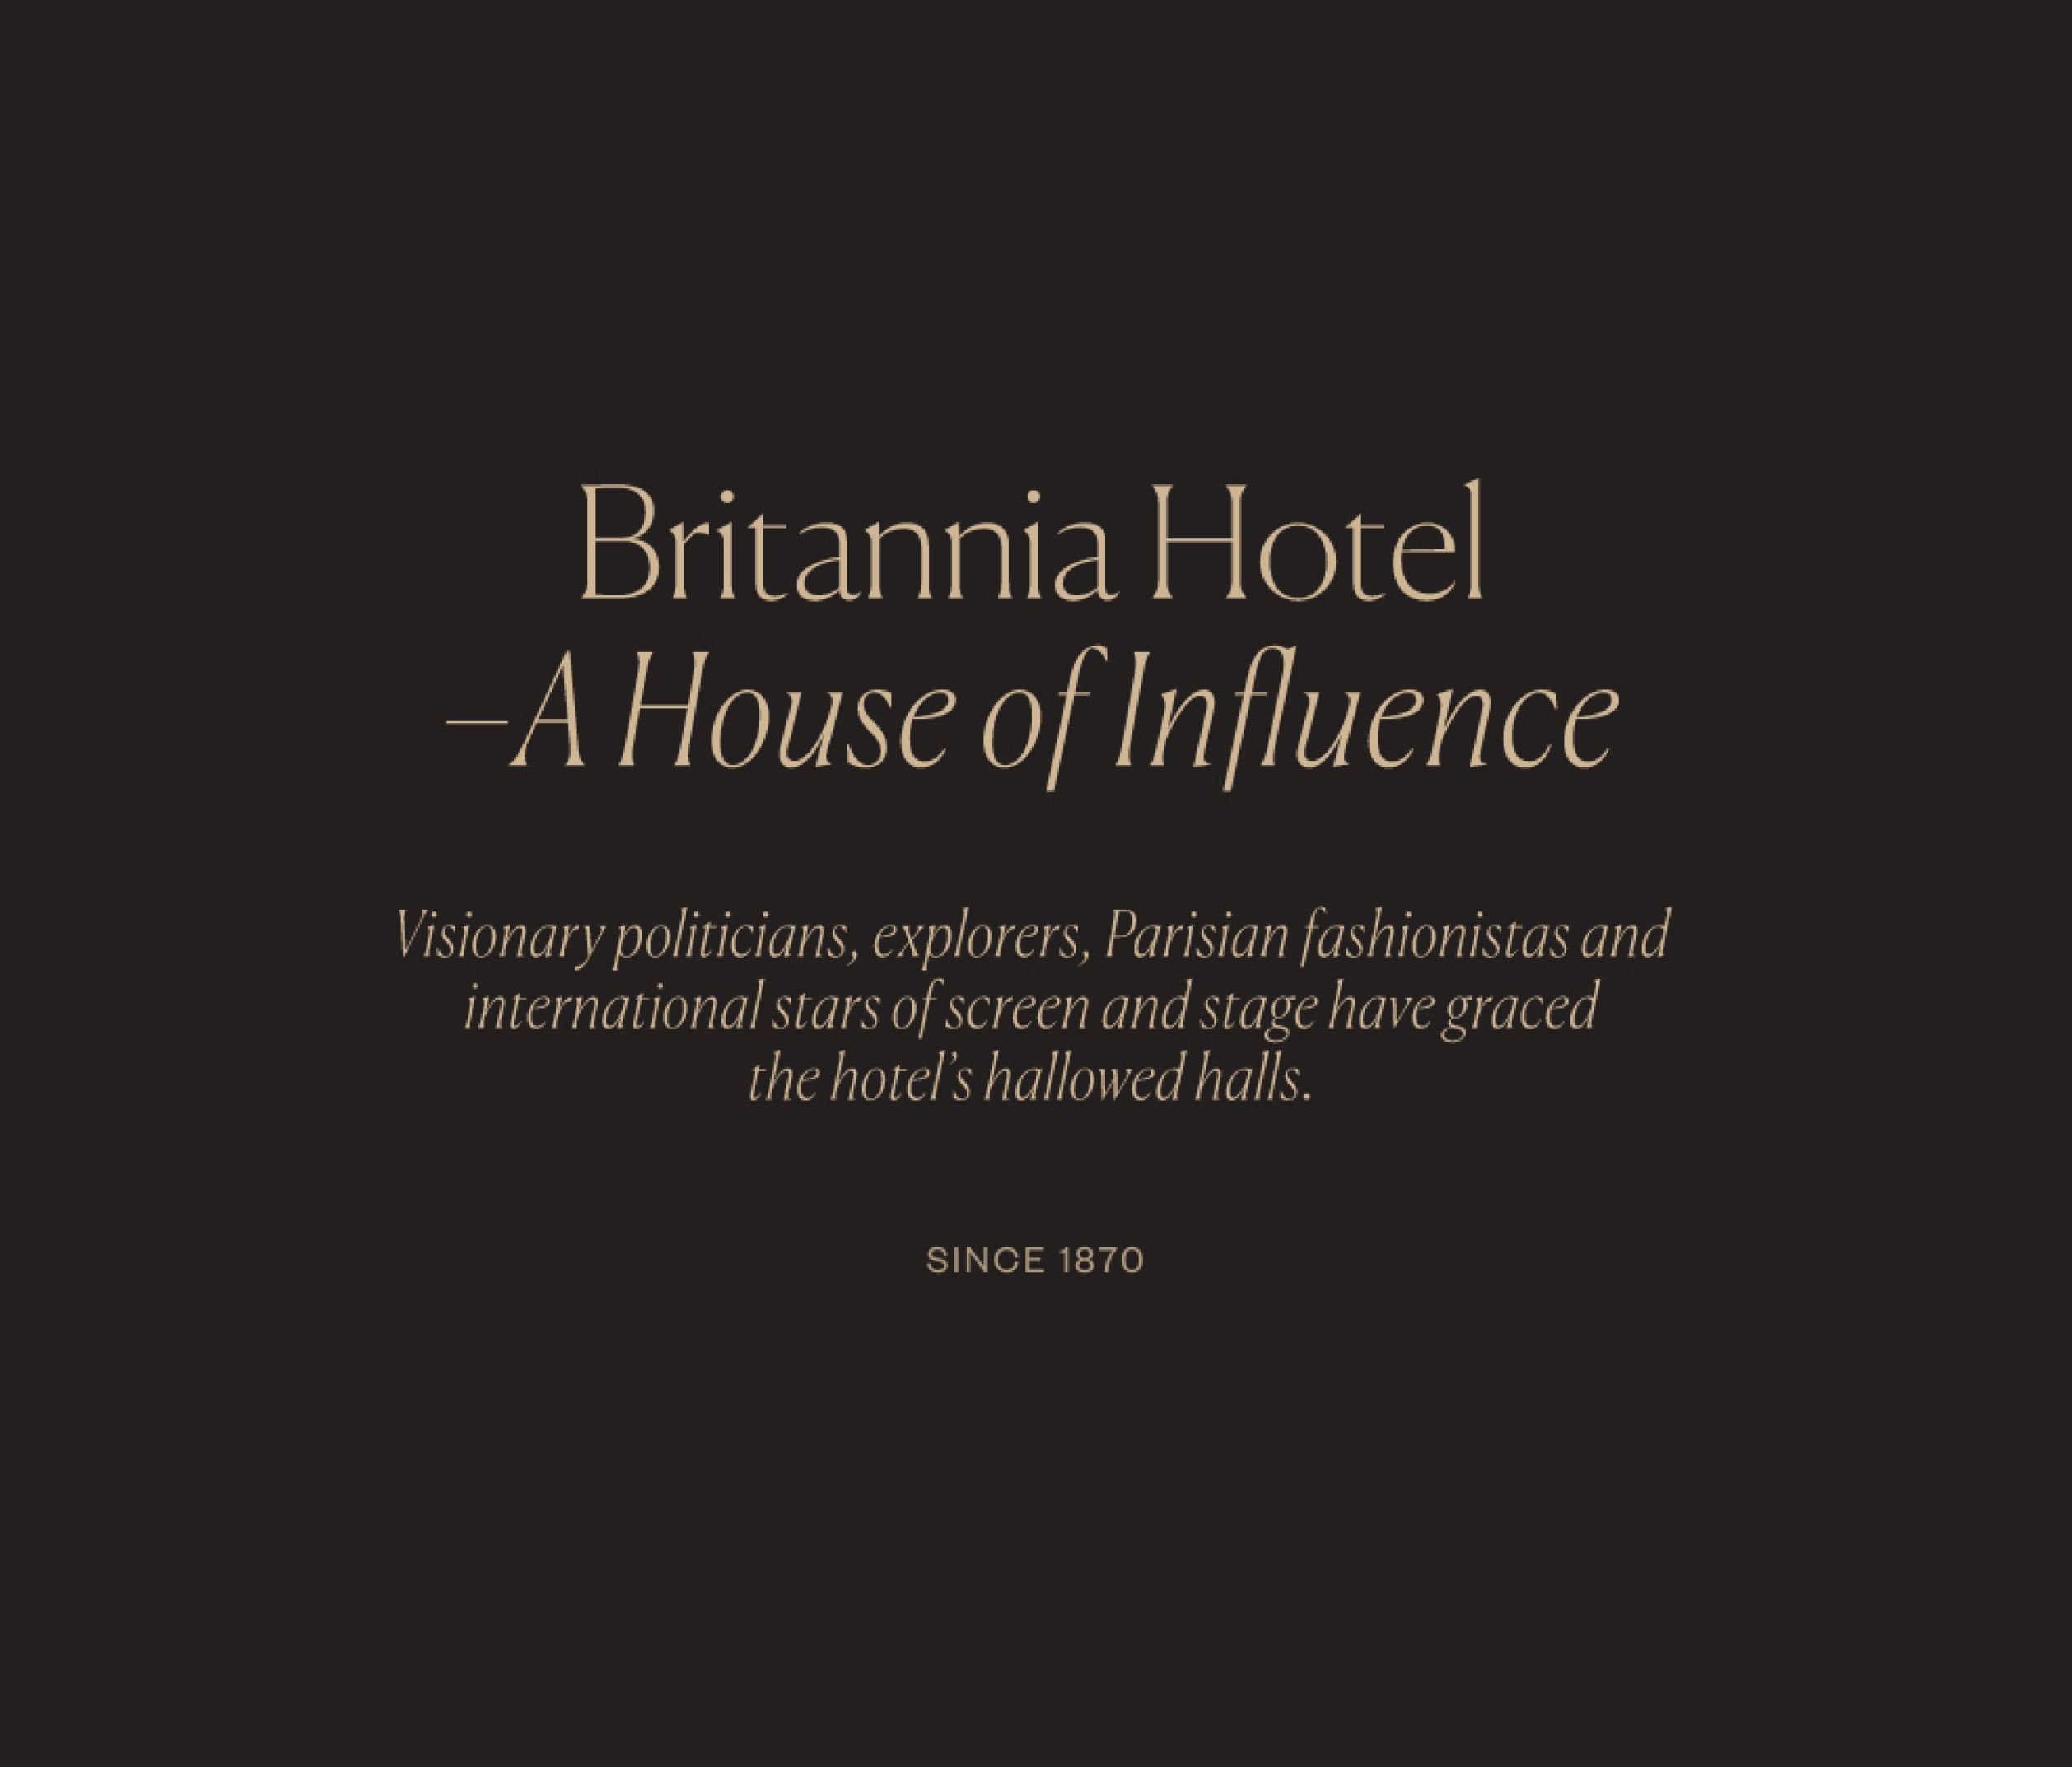 "Britannia Hotel - A house of influence. Visionary politicians, explorers, Parisian fashionistas and international stas of screen and stage have graced the hotel's hallowed halls. Since 1870"